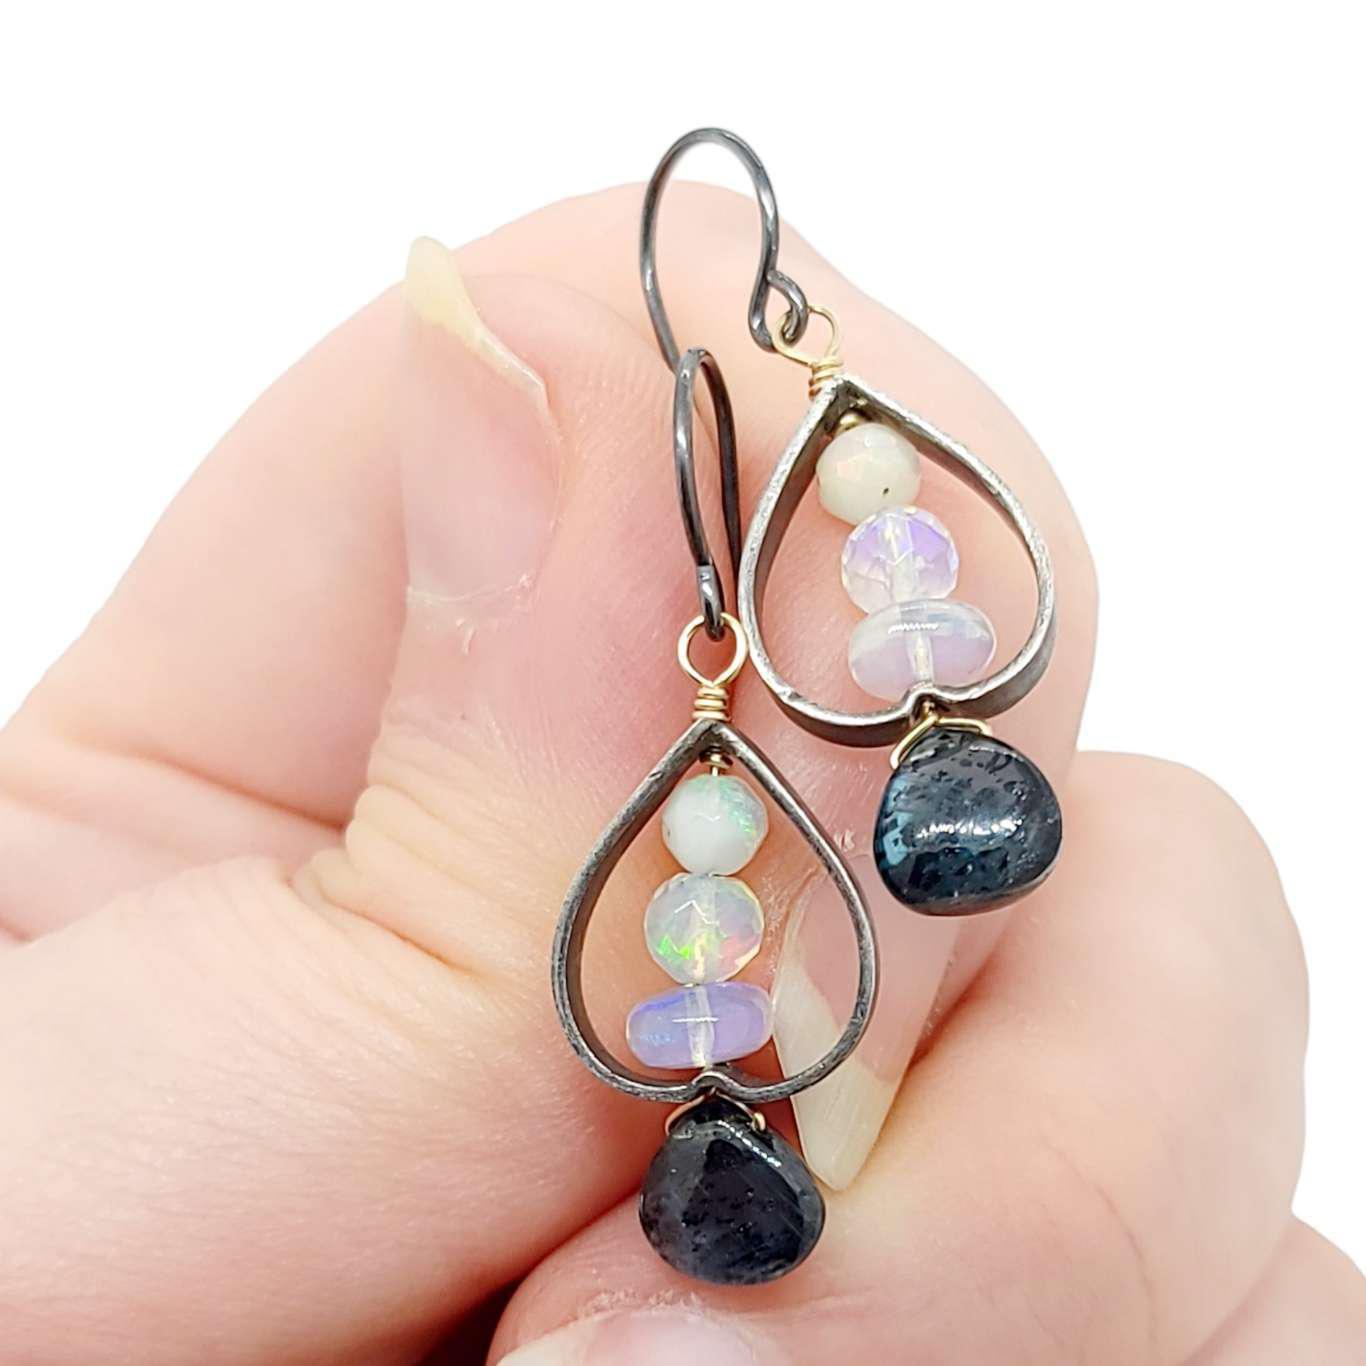 Earrings - Inverted Heart Frame with Opal and Moss Kyanite by Calliope Jewelry